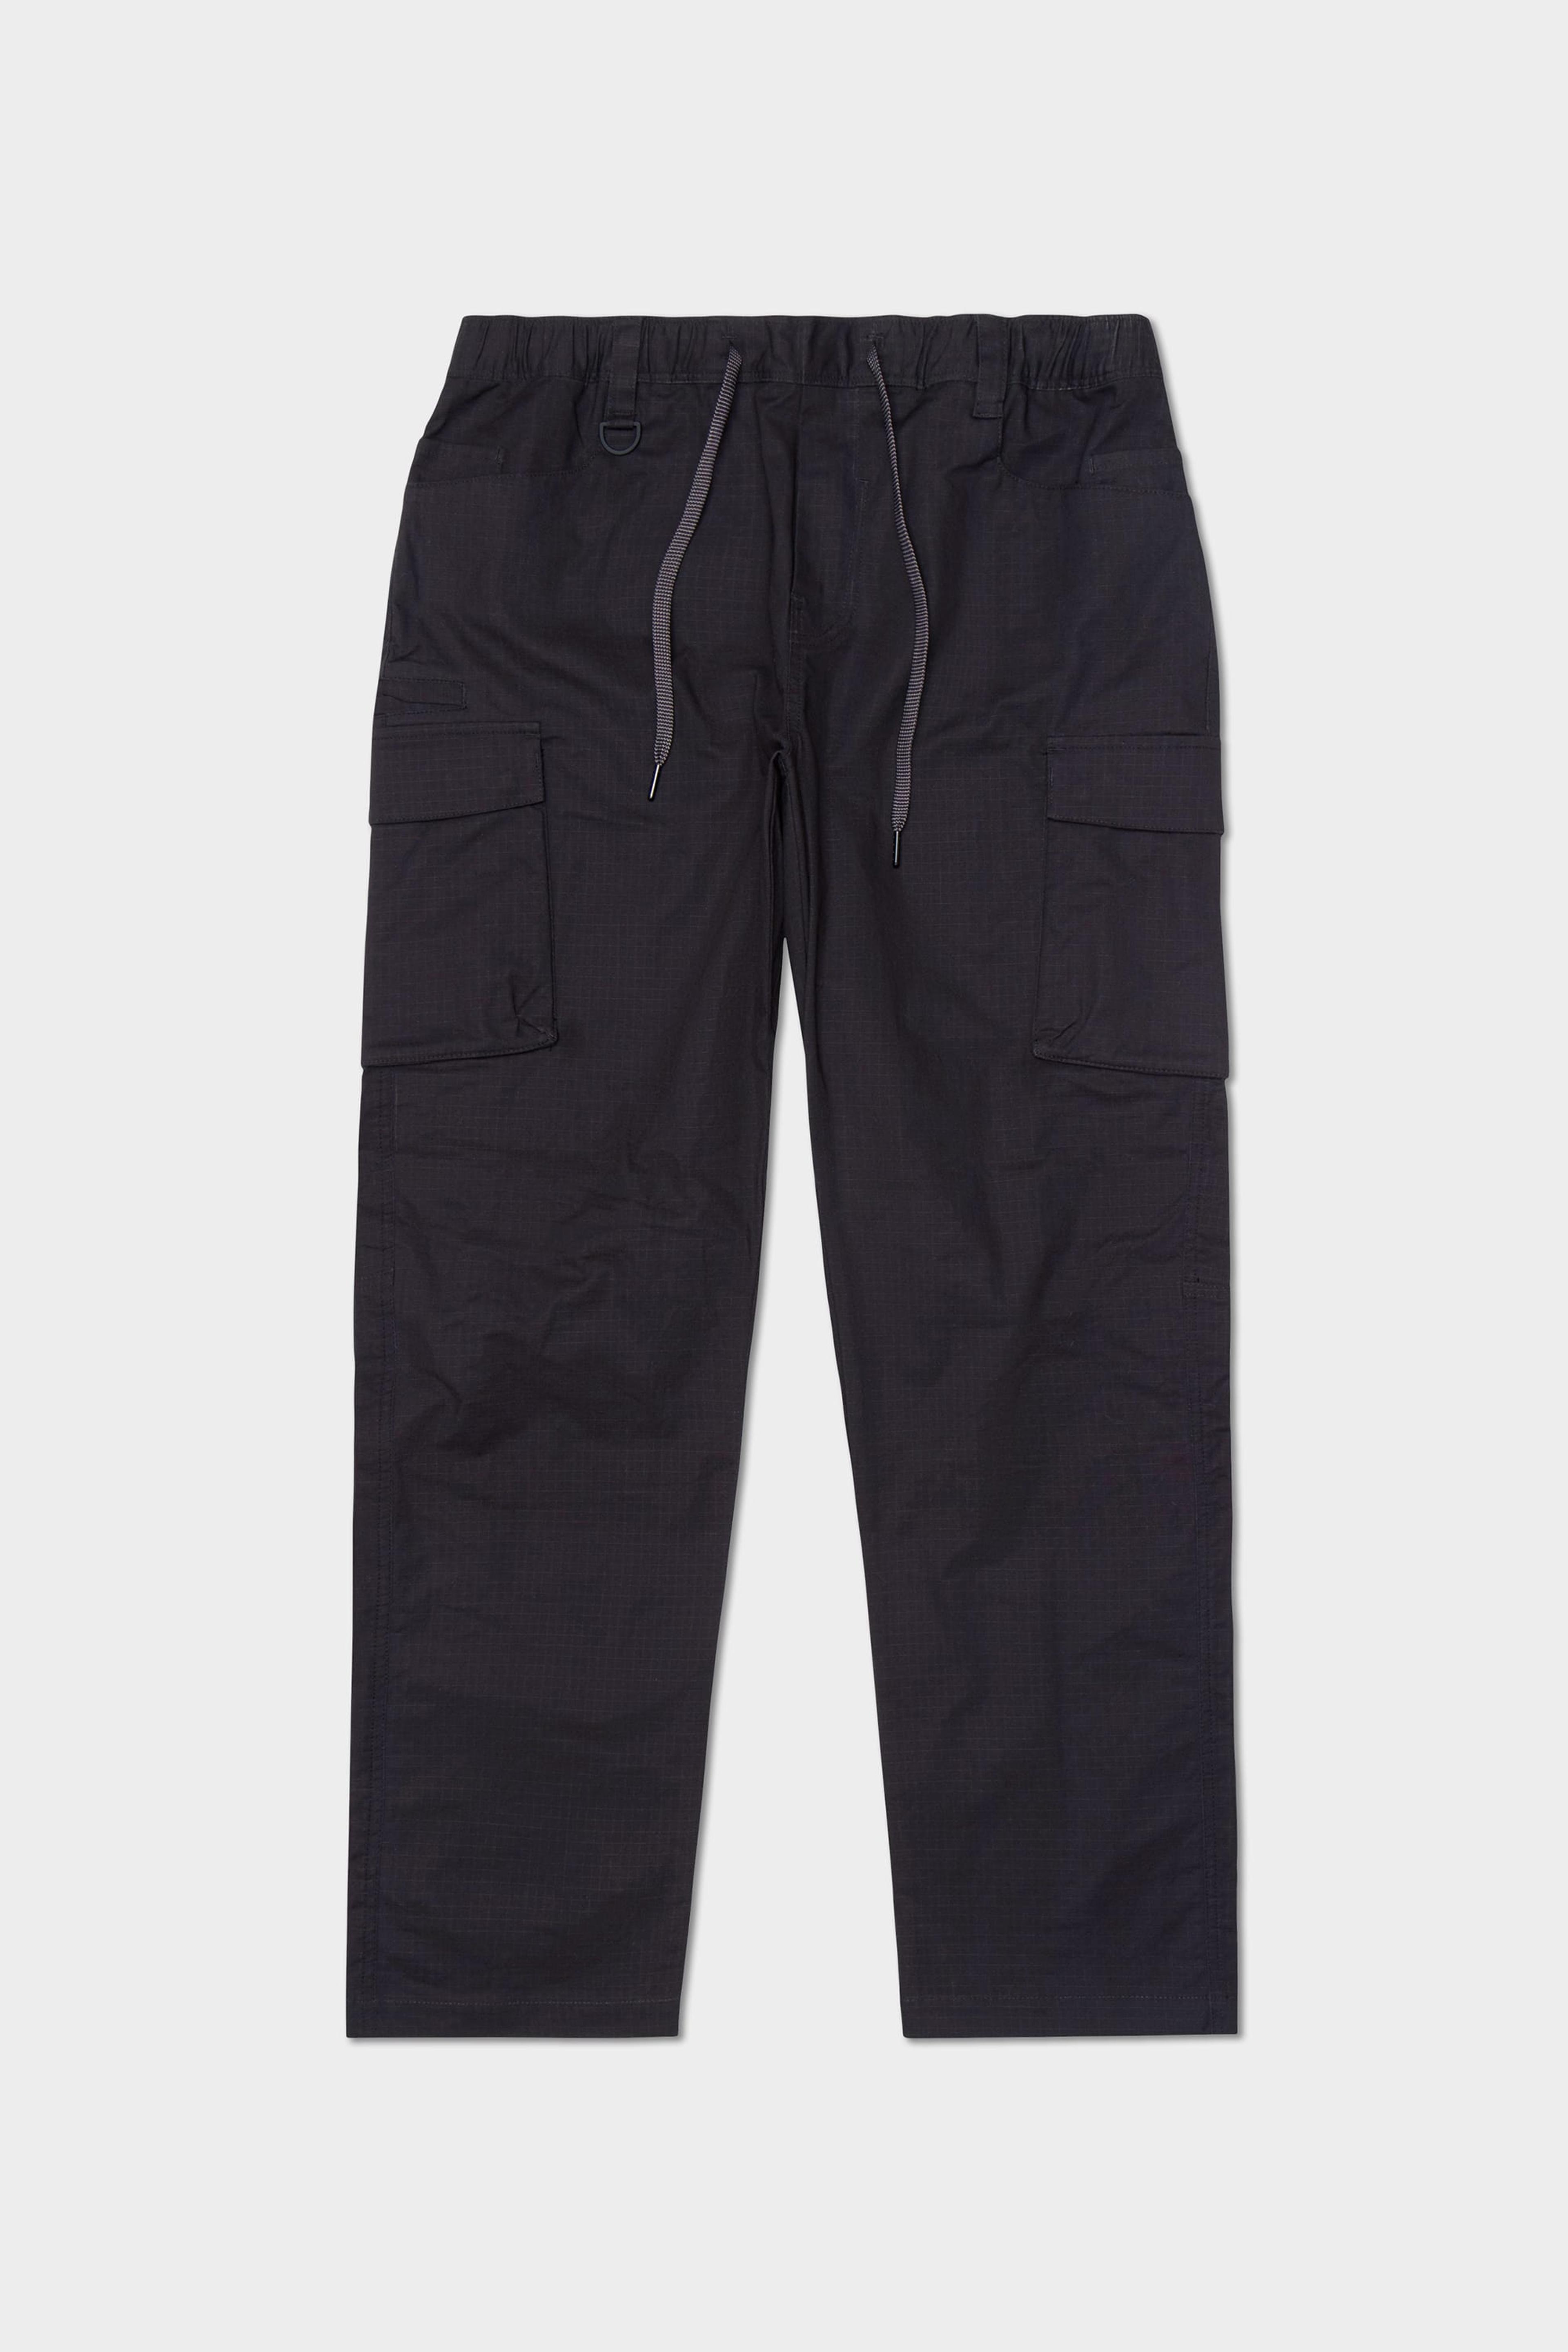 686 Men's All Time Cargo Pant - Wide Tapered Fit